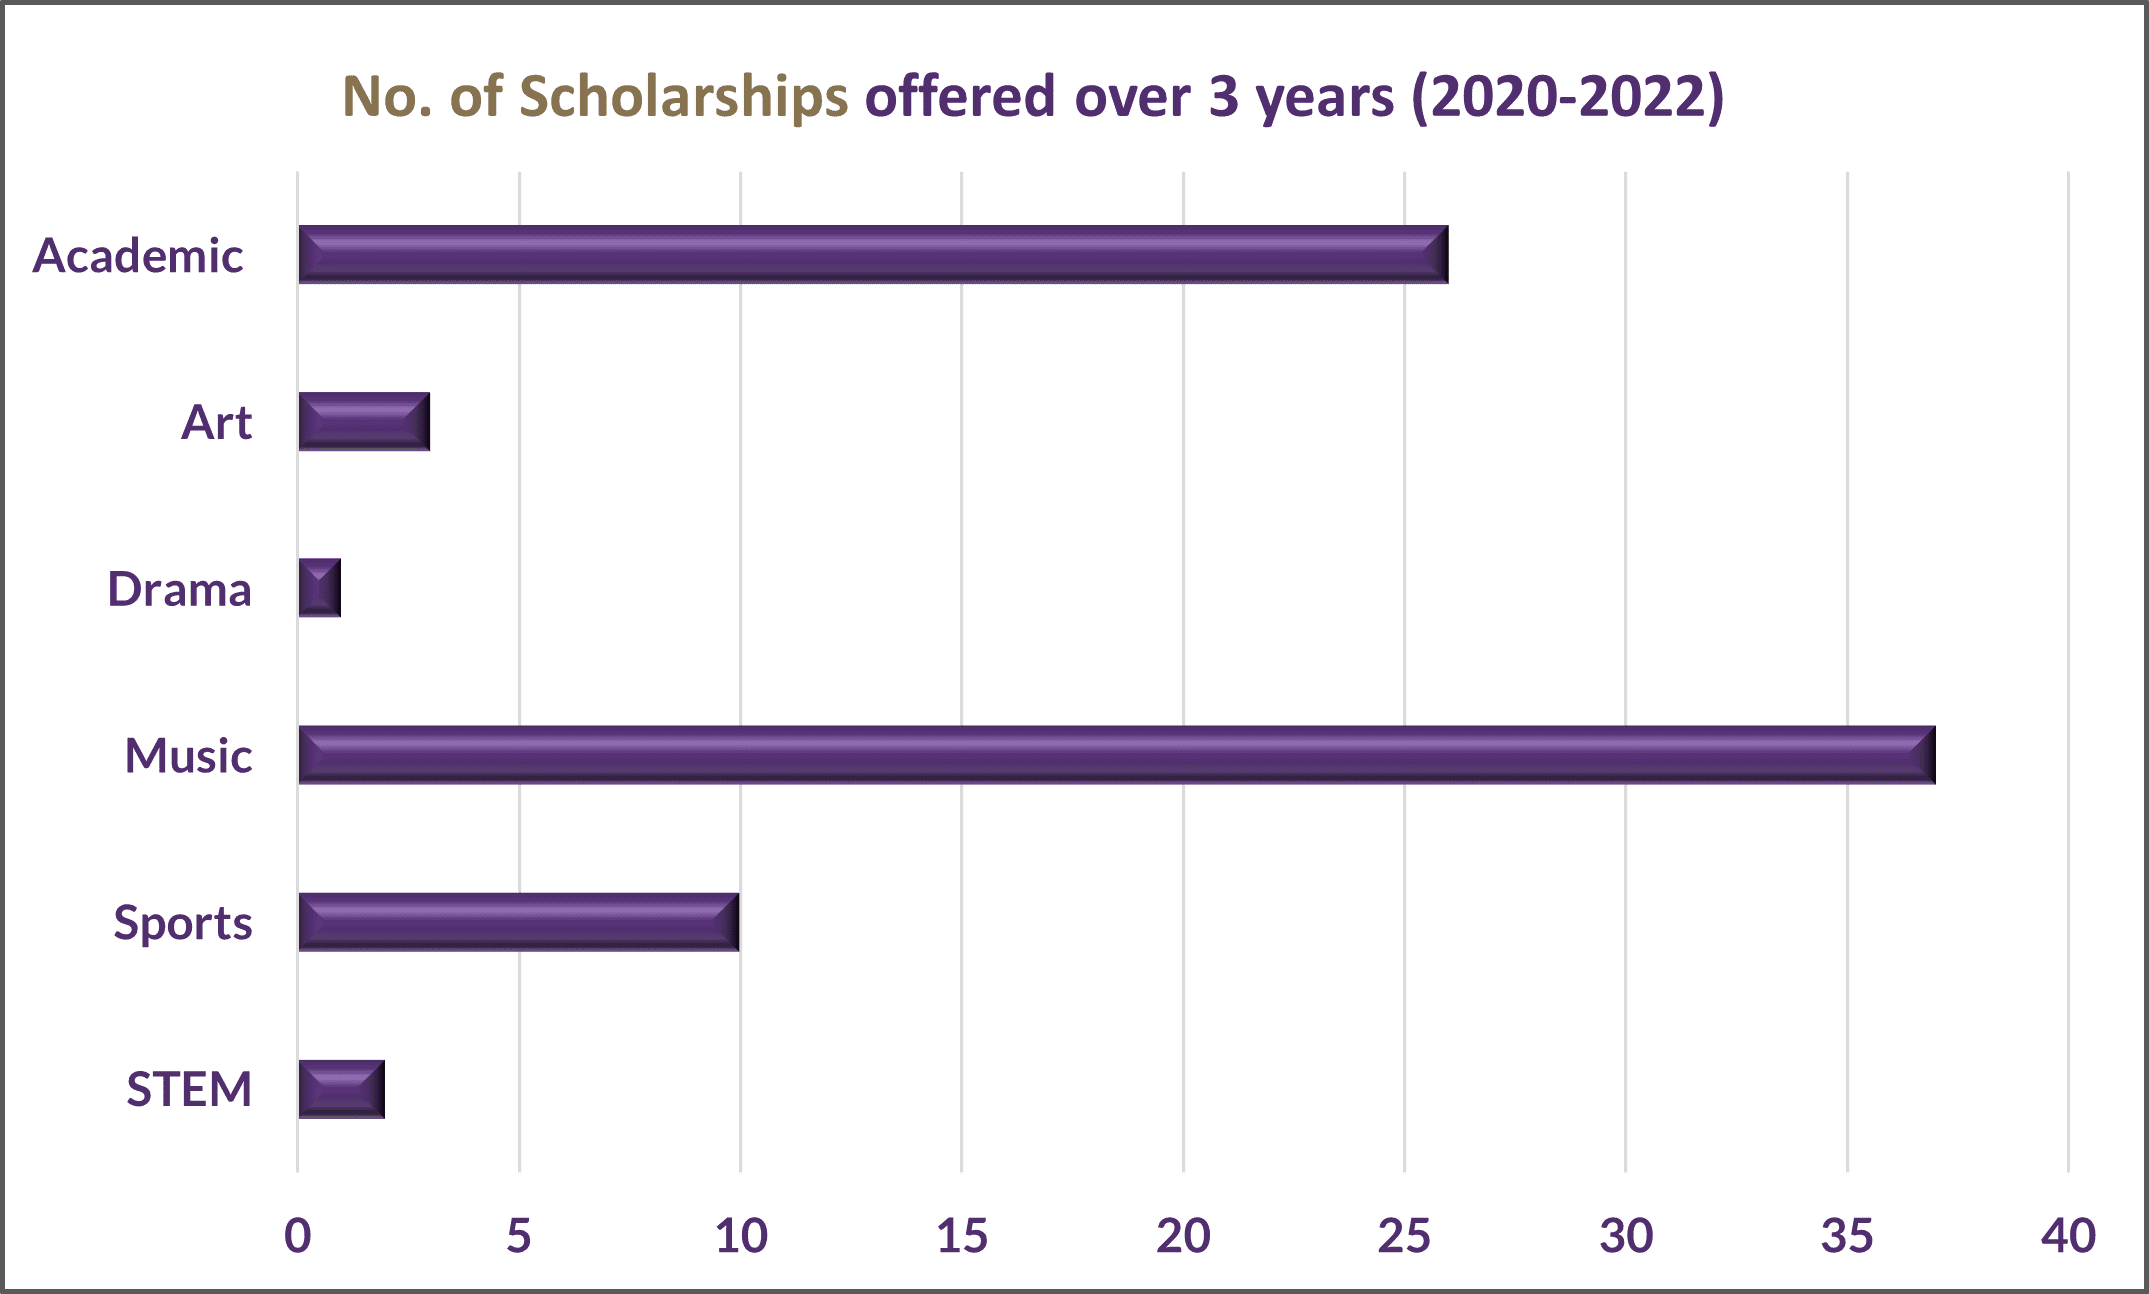 No of Scholarships Offered over 3 Years (2020-2022)